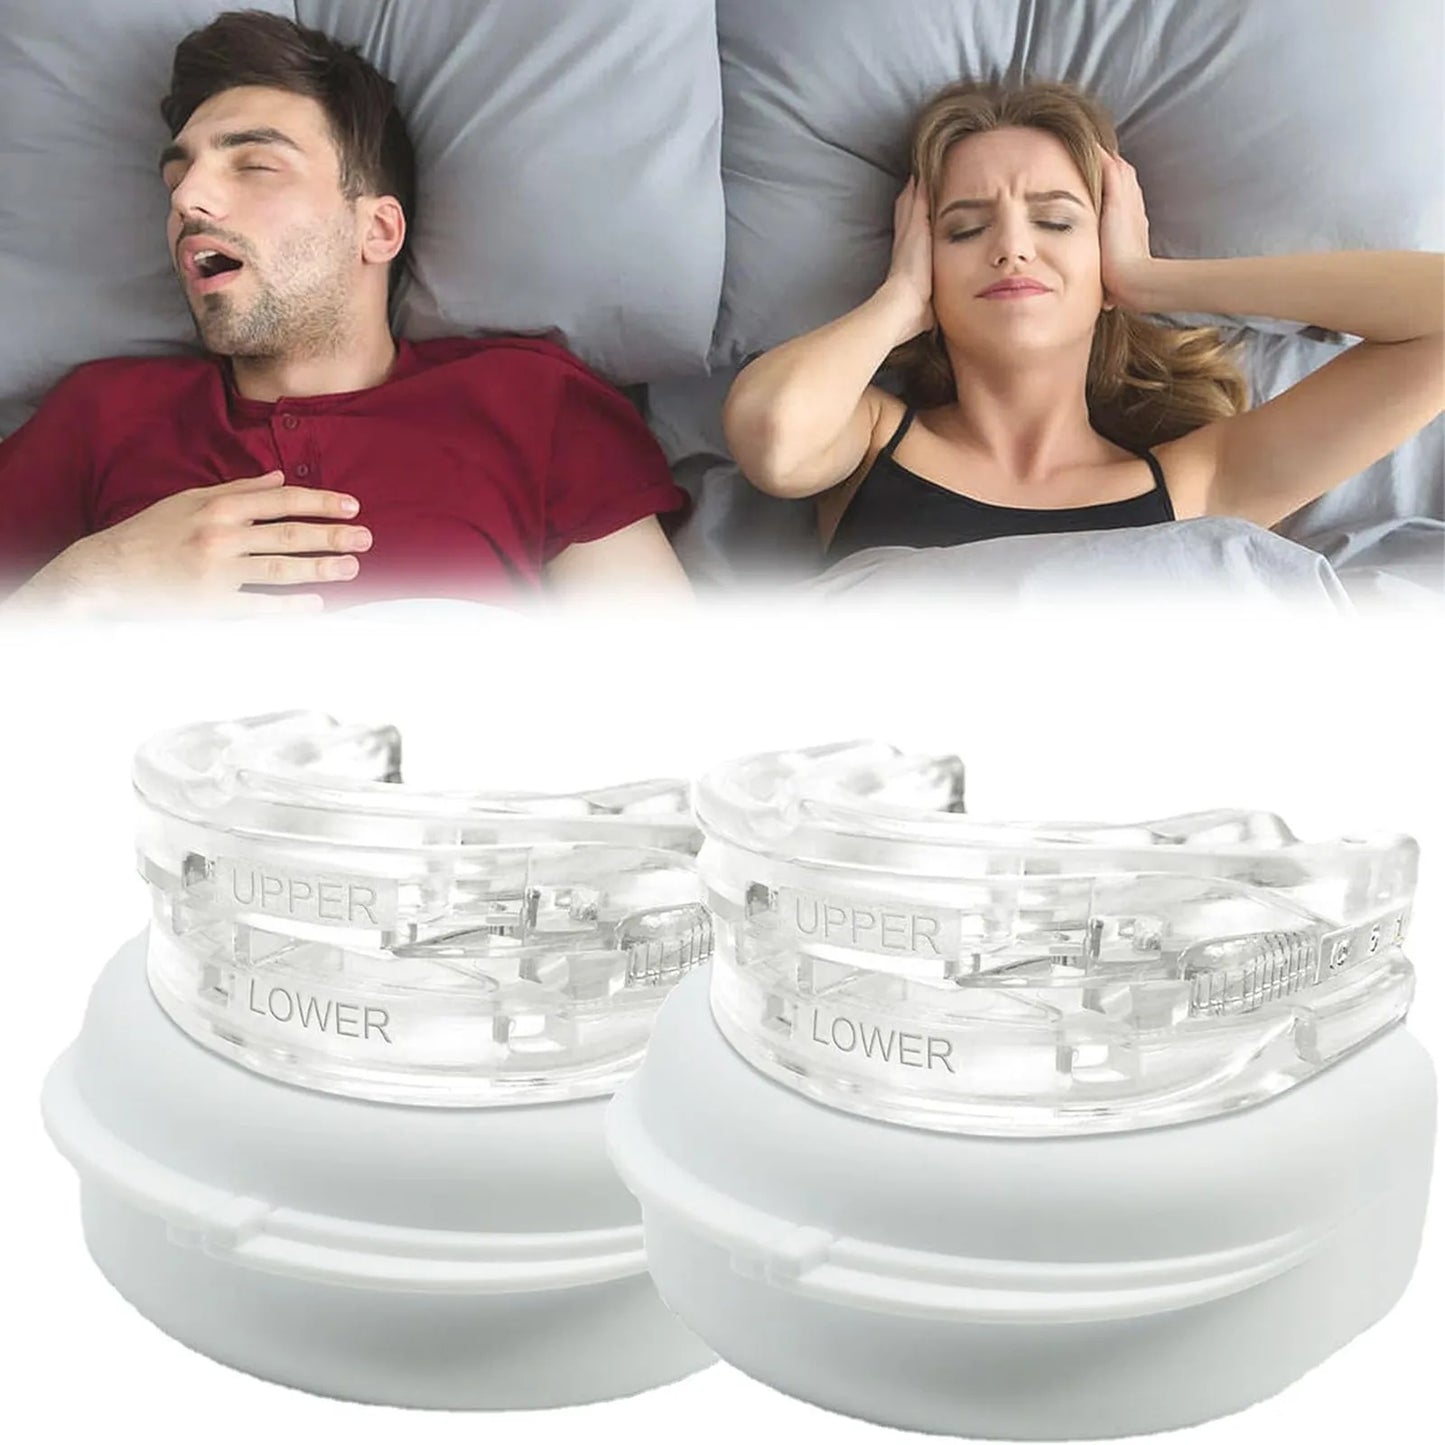 The Anti Snore